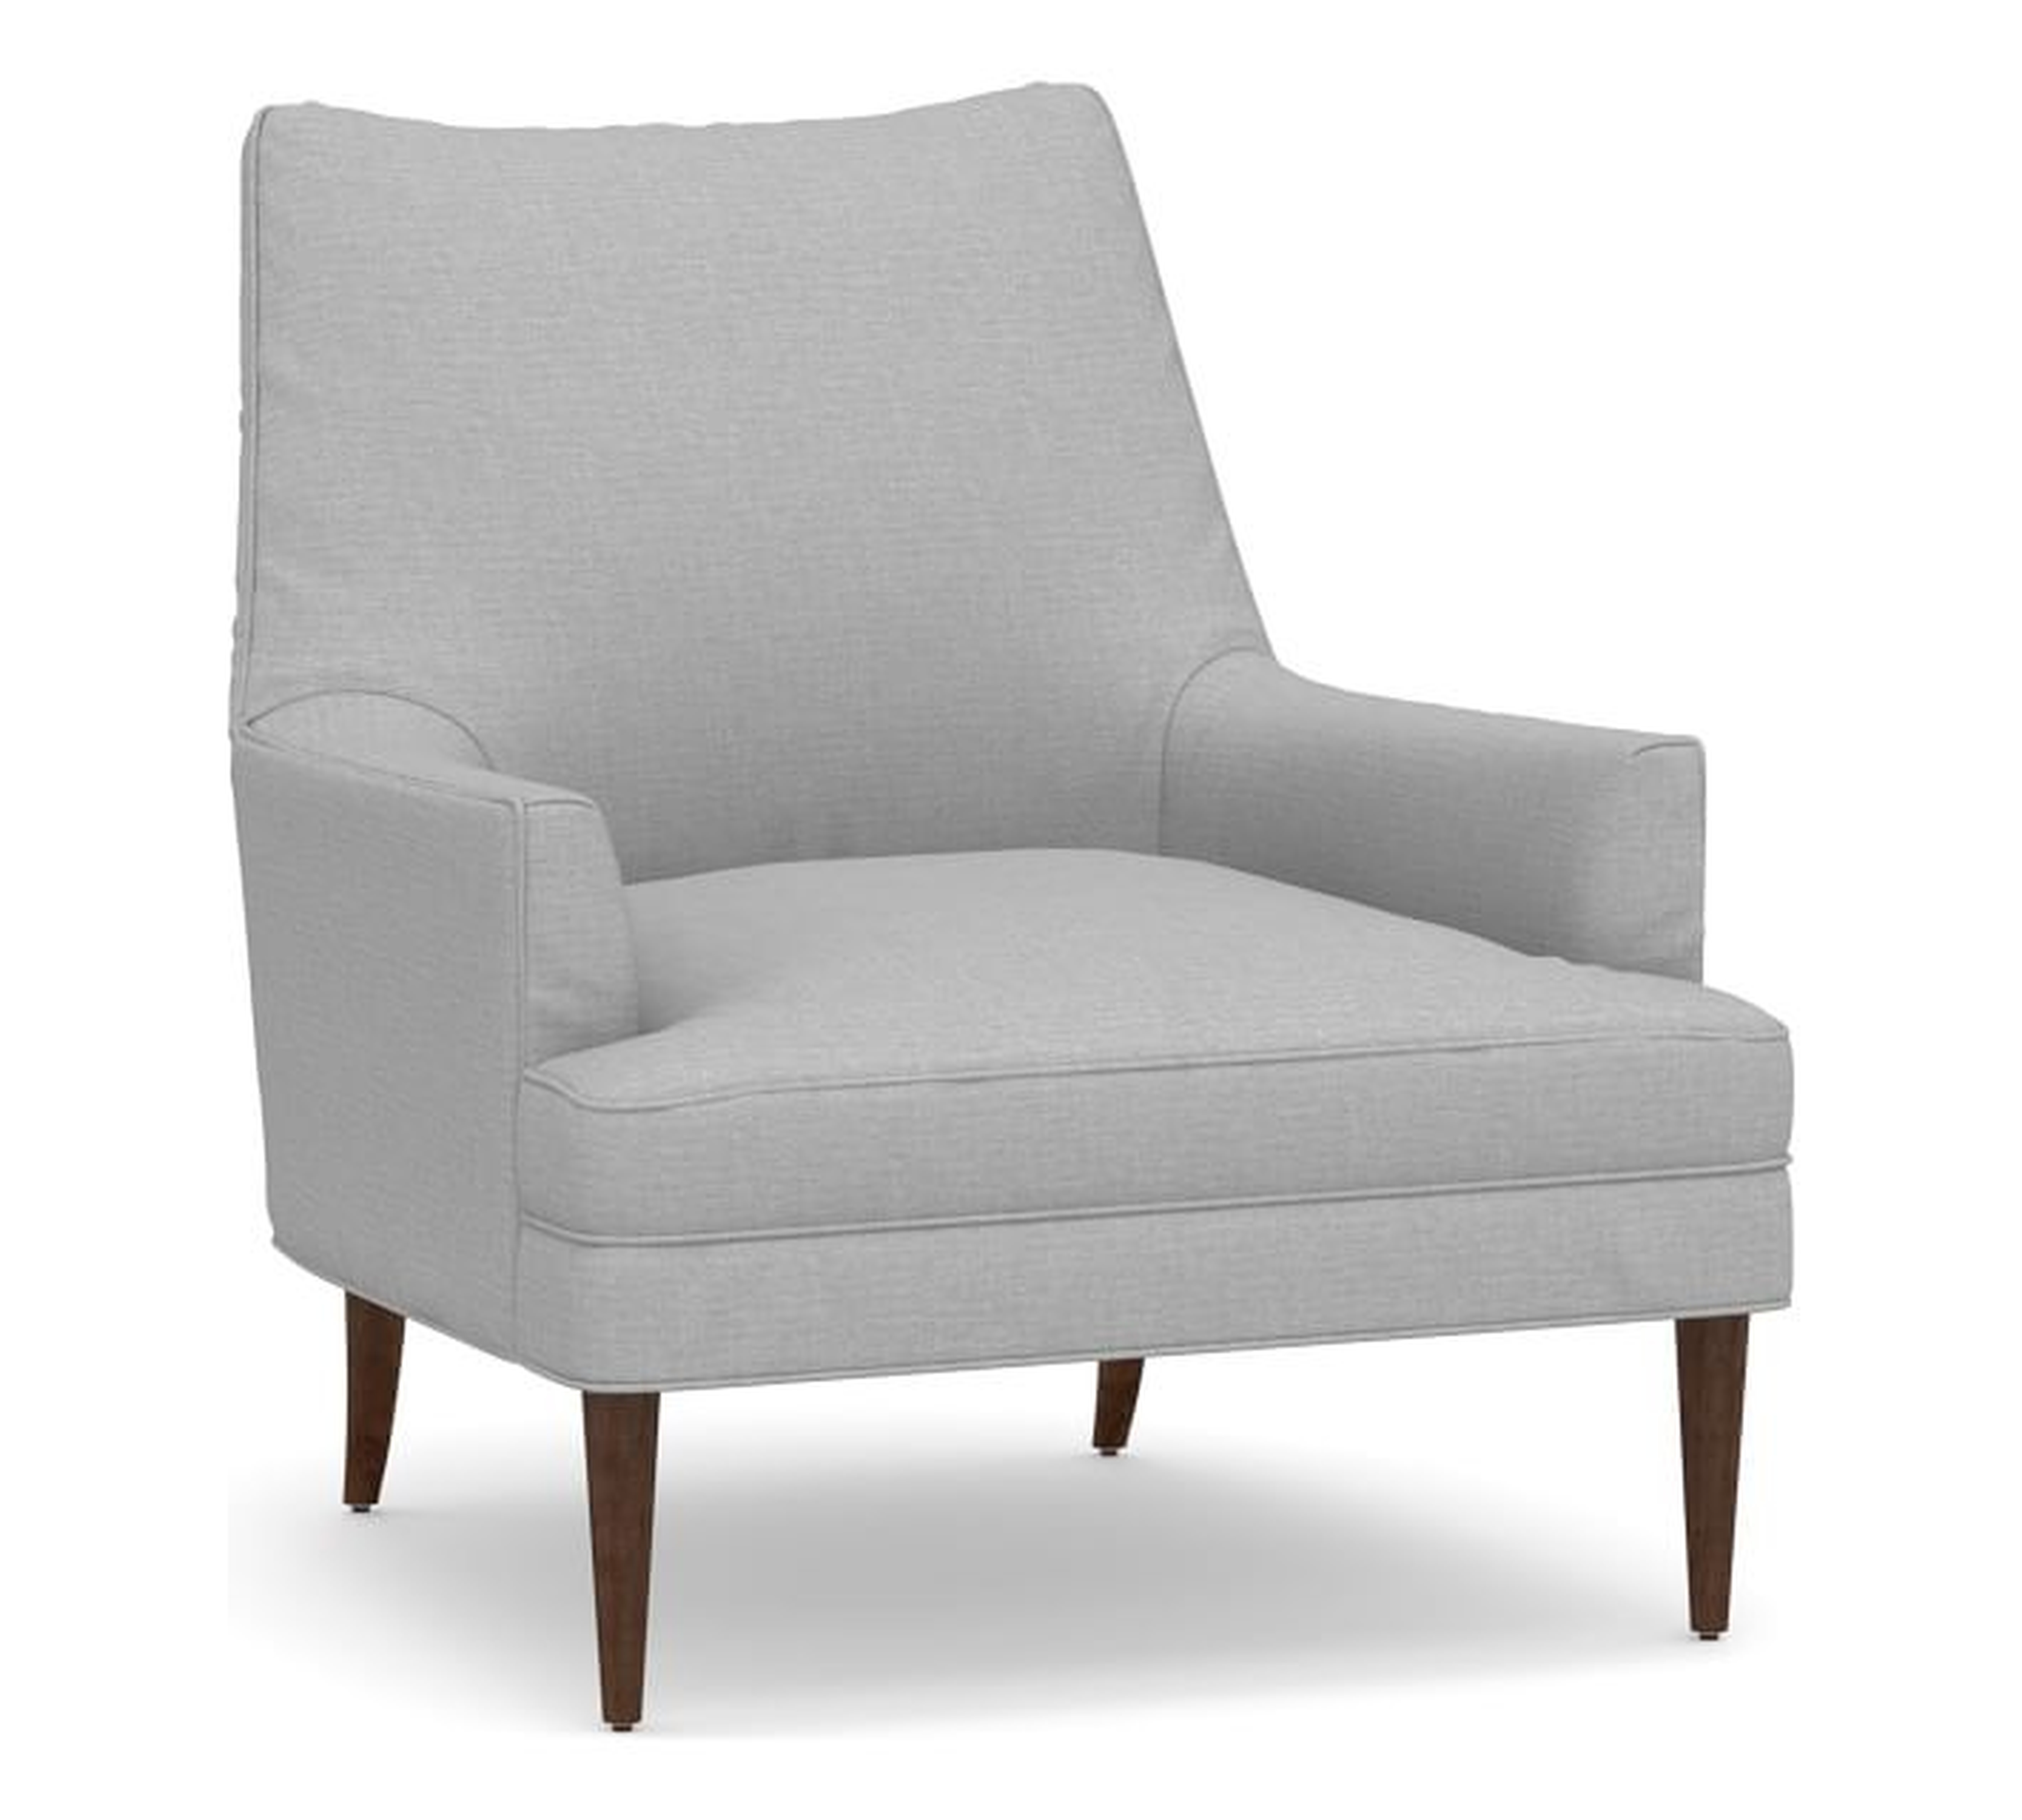 Reyes Upholstered Armchair, Polyester Wrapped Cushions, Brushed Crossweave Light Gray - Pottery Barn